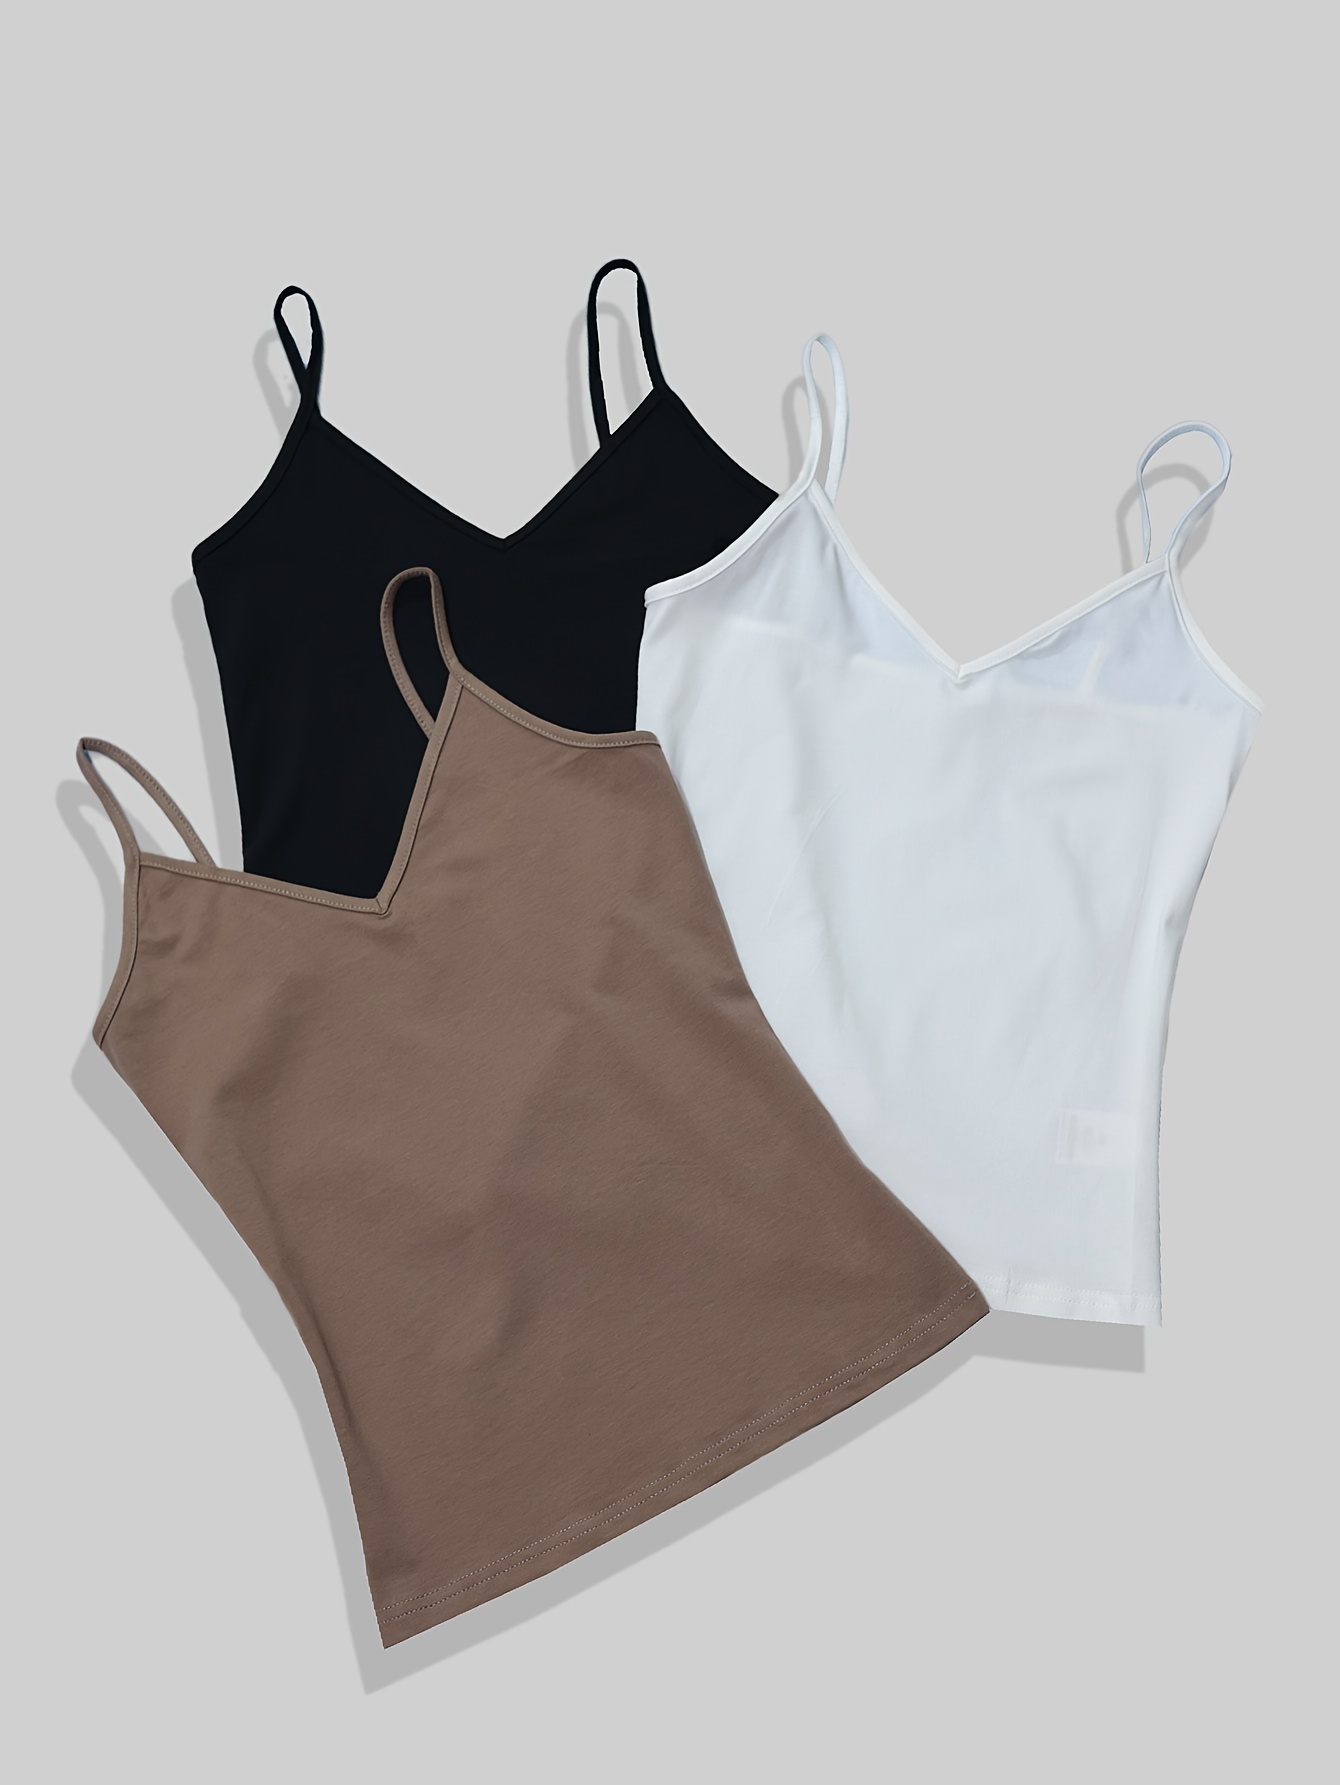 Women's Backless Cami Top Built-in Padded Bra Camisole Spaghetti Strap Top  For Summer, Can Be Worn As An Undergarment Or Outwear